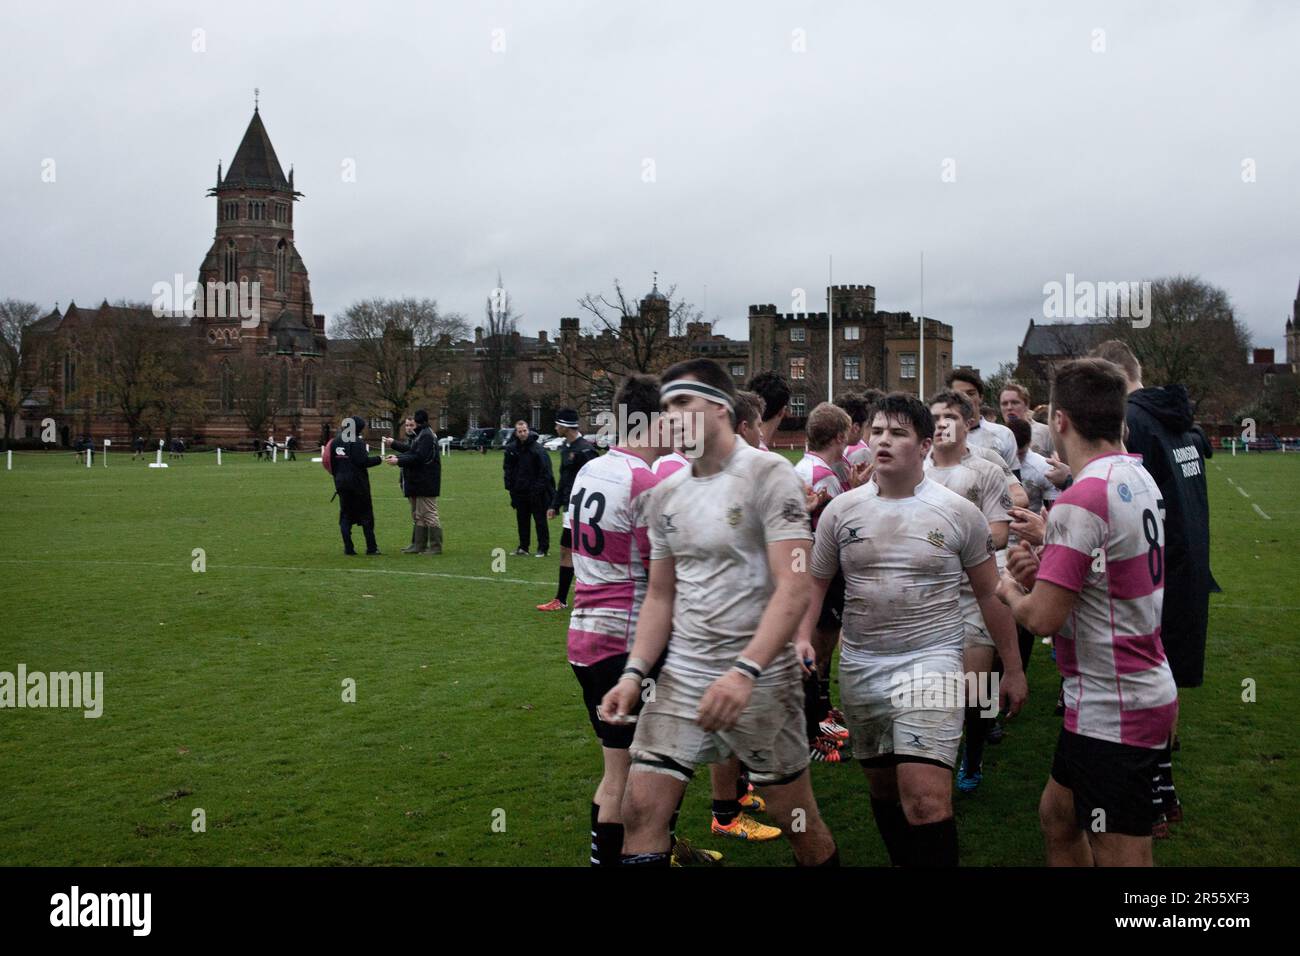 A rugby match played at 'the Close', at Rugby school, the same rugby pitch where that sport was allegedly invented by William Webb Ellis in 1823. Stock Photo